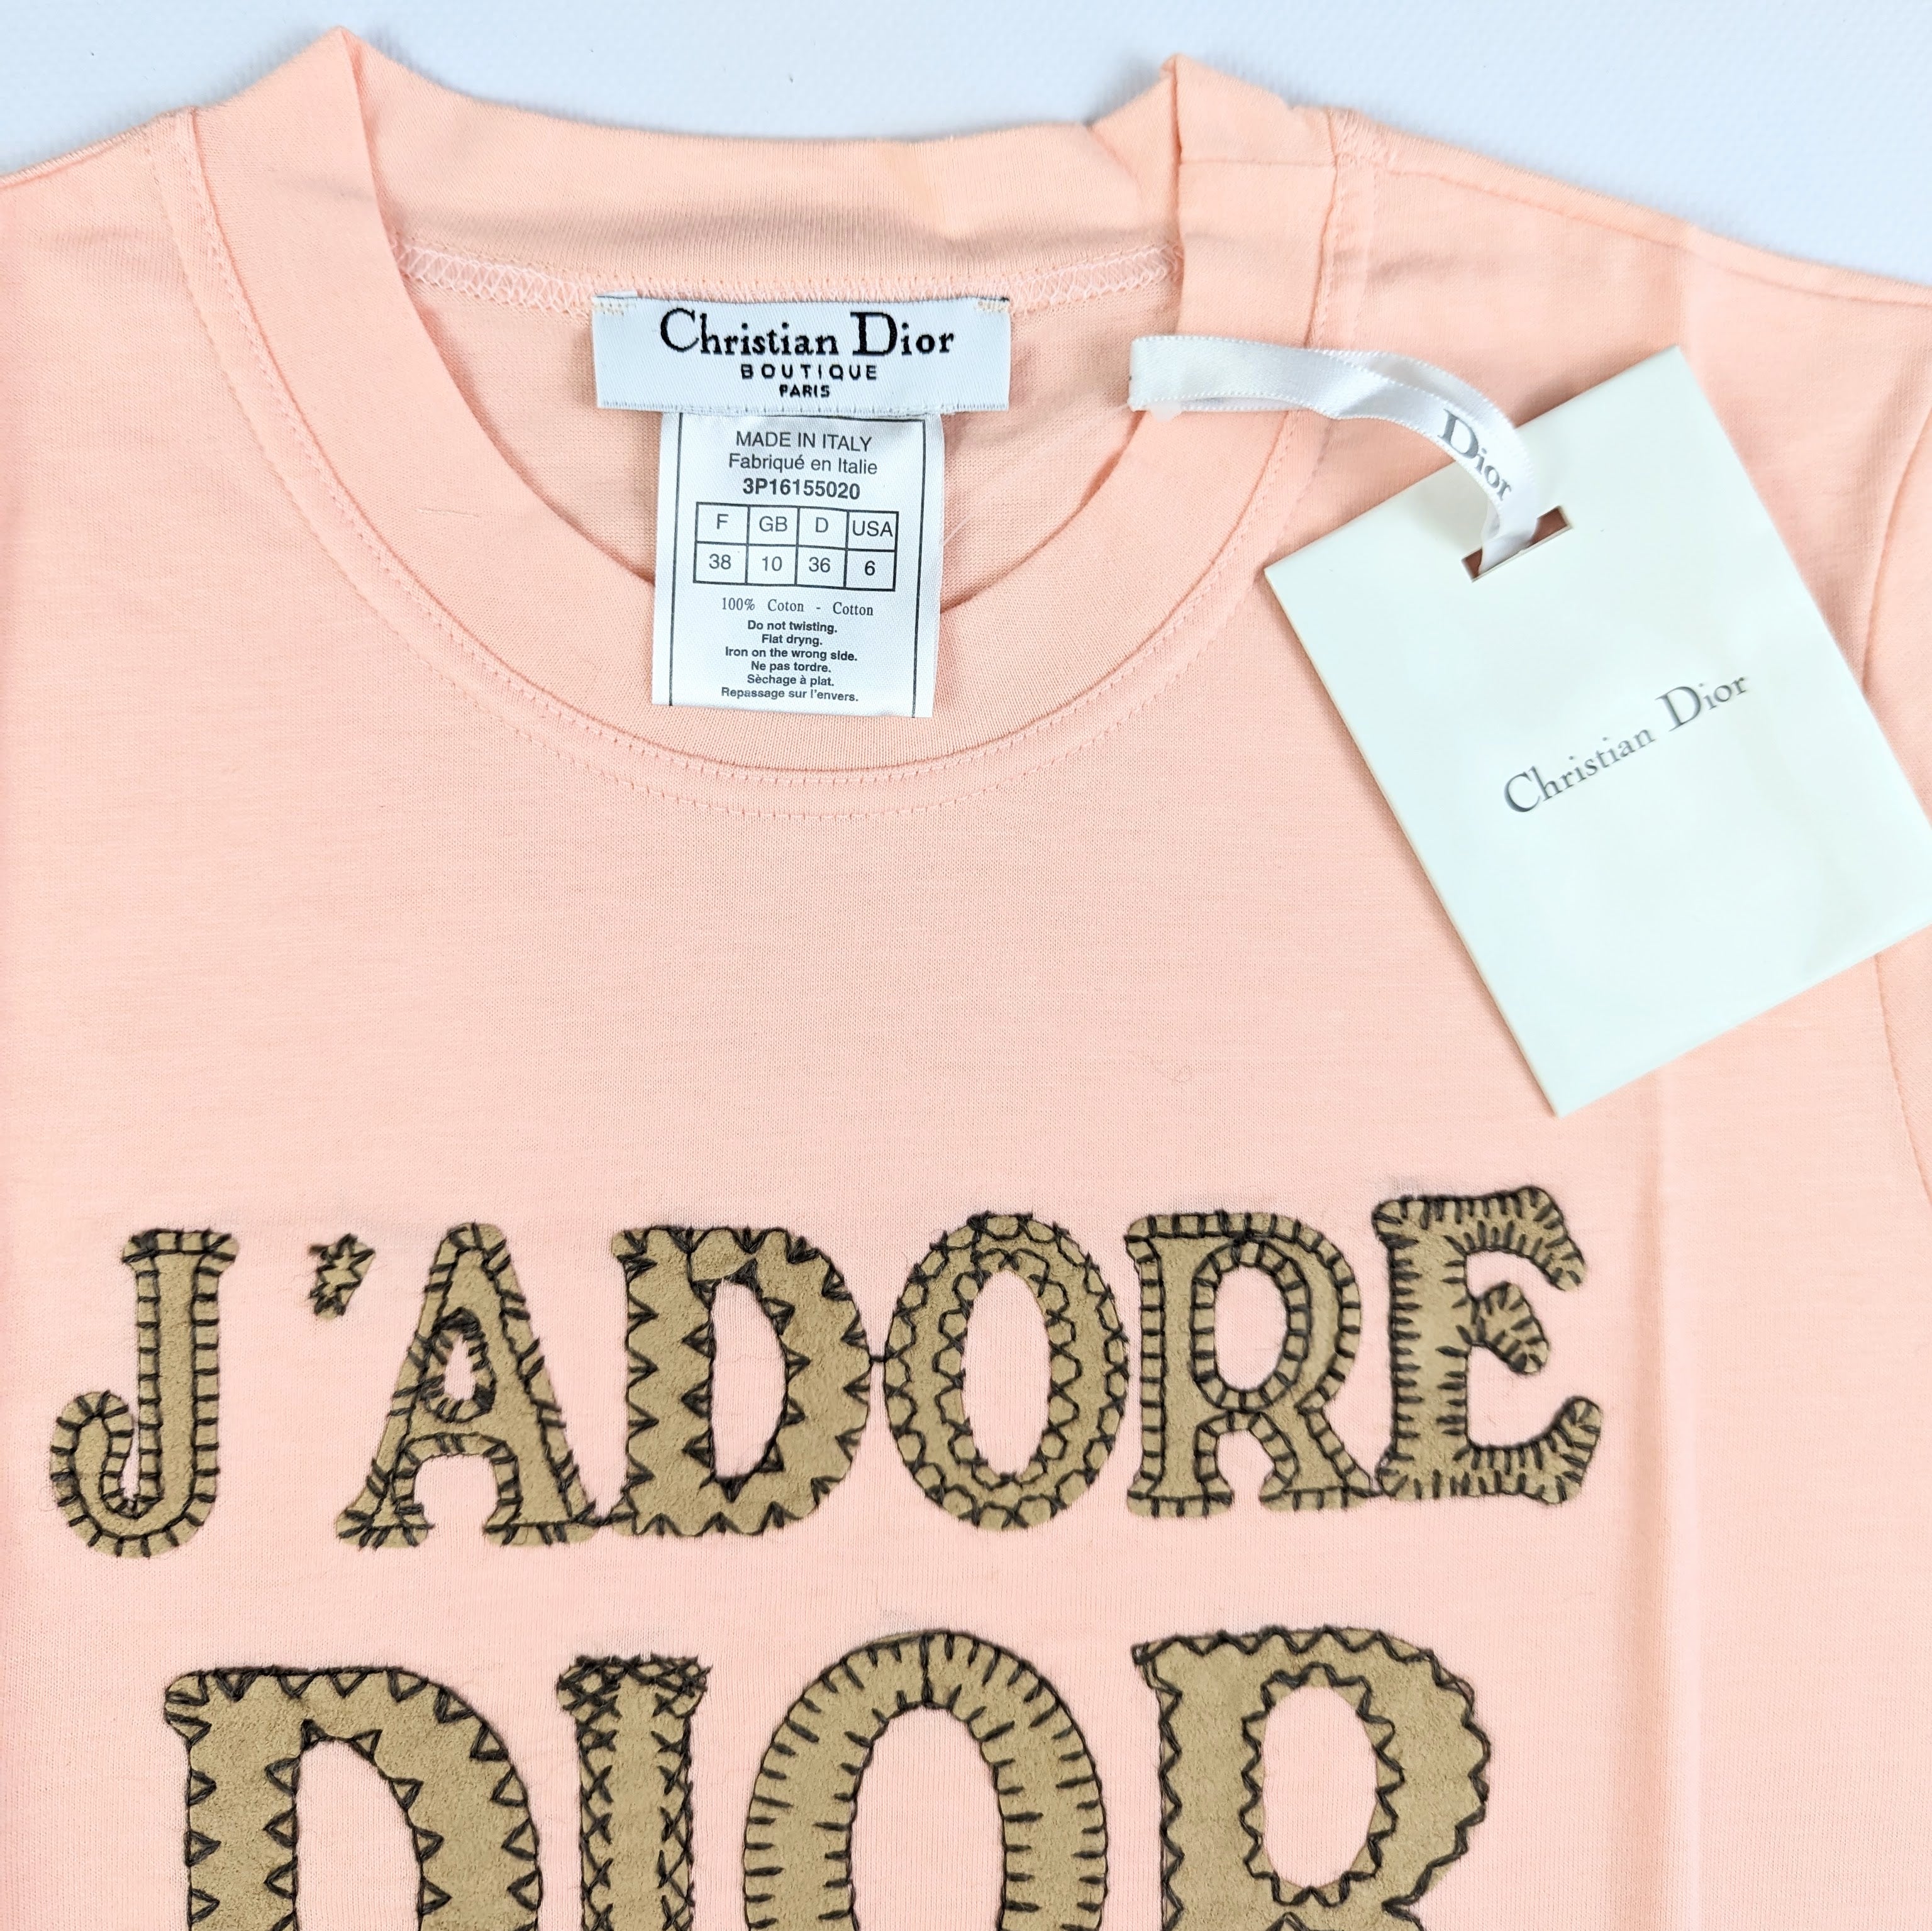 New Dior t-shirt by Galliano 